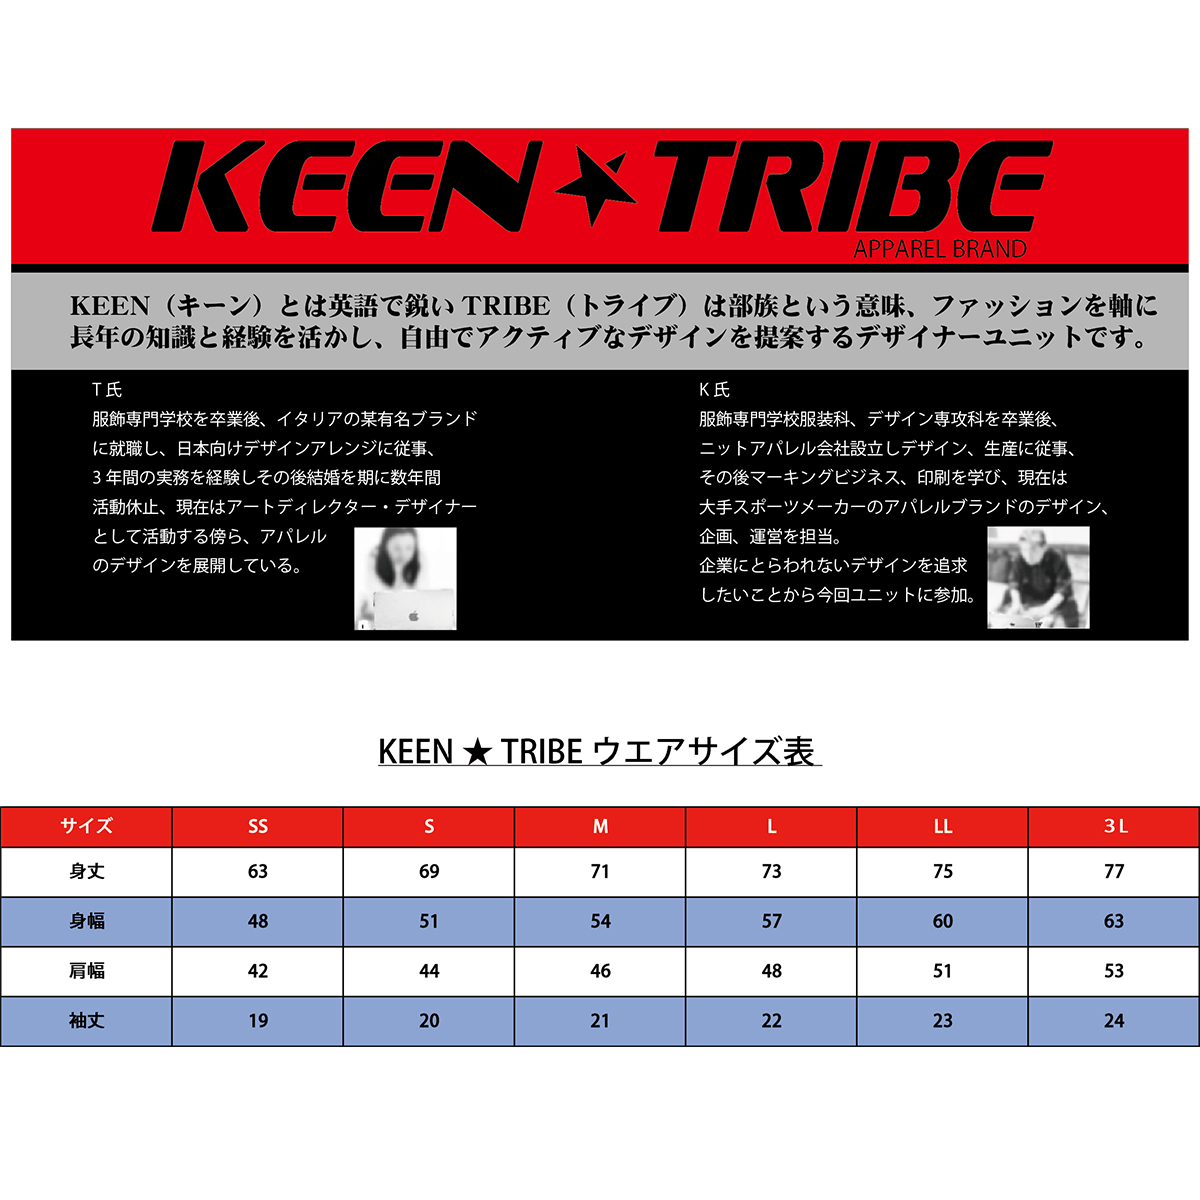 KEEN ★ TRIBE　KT-12(受注生産)